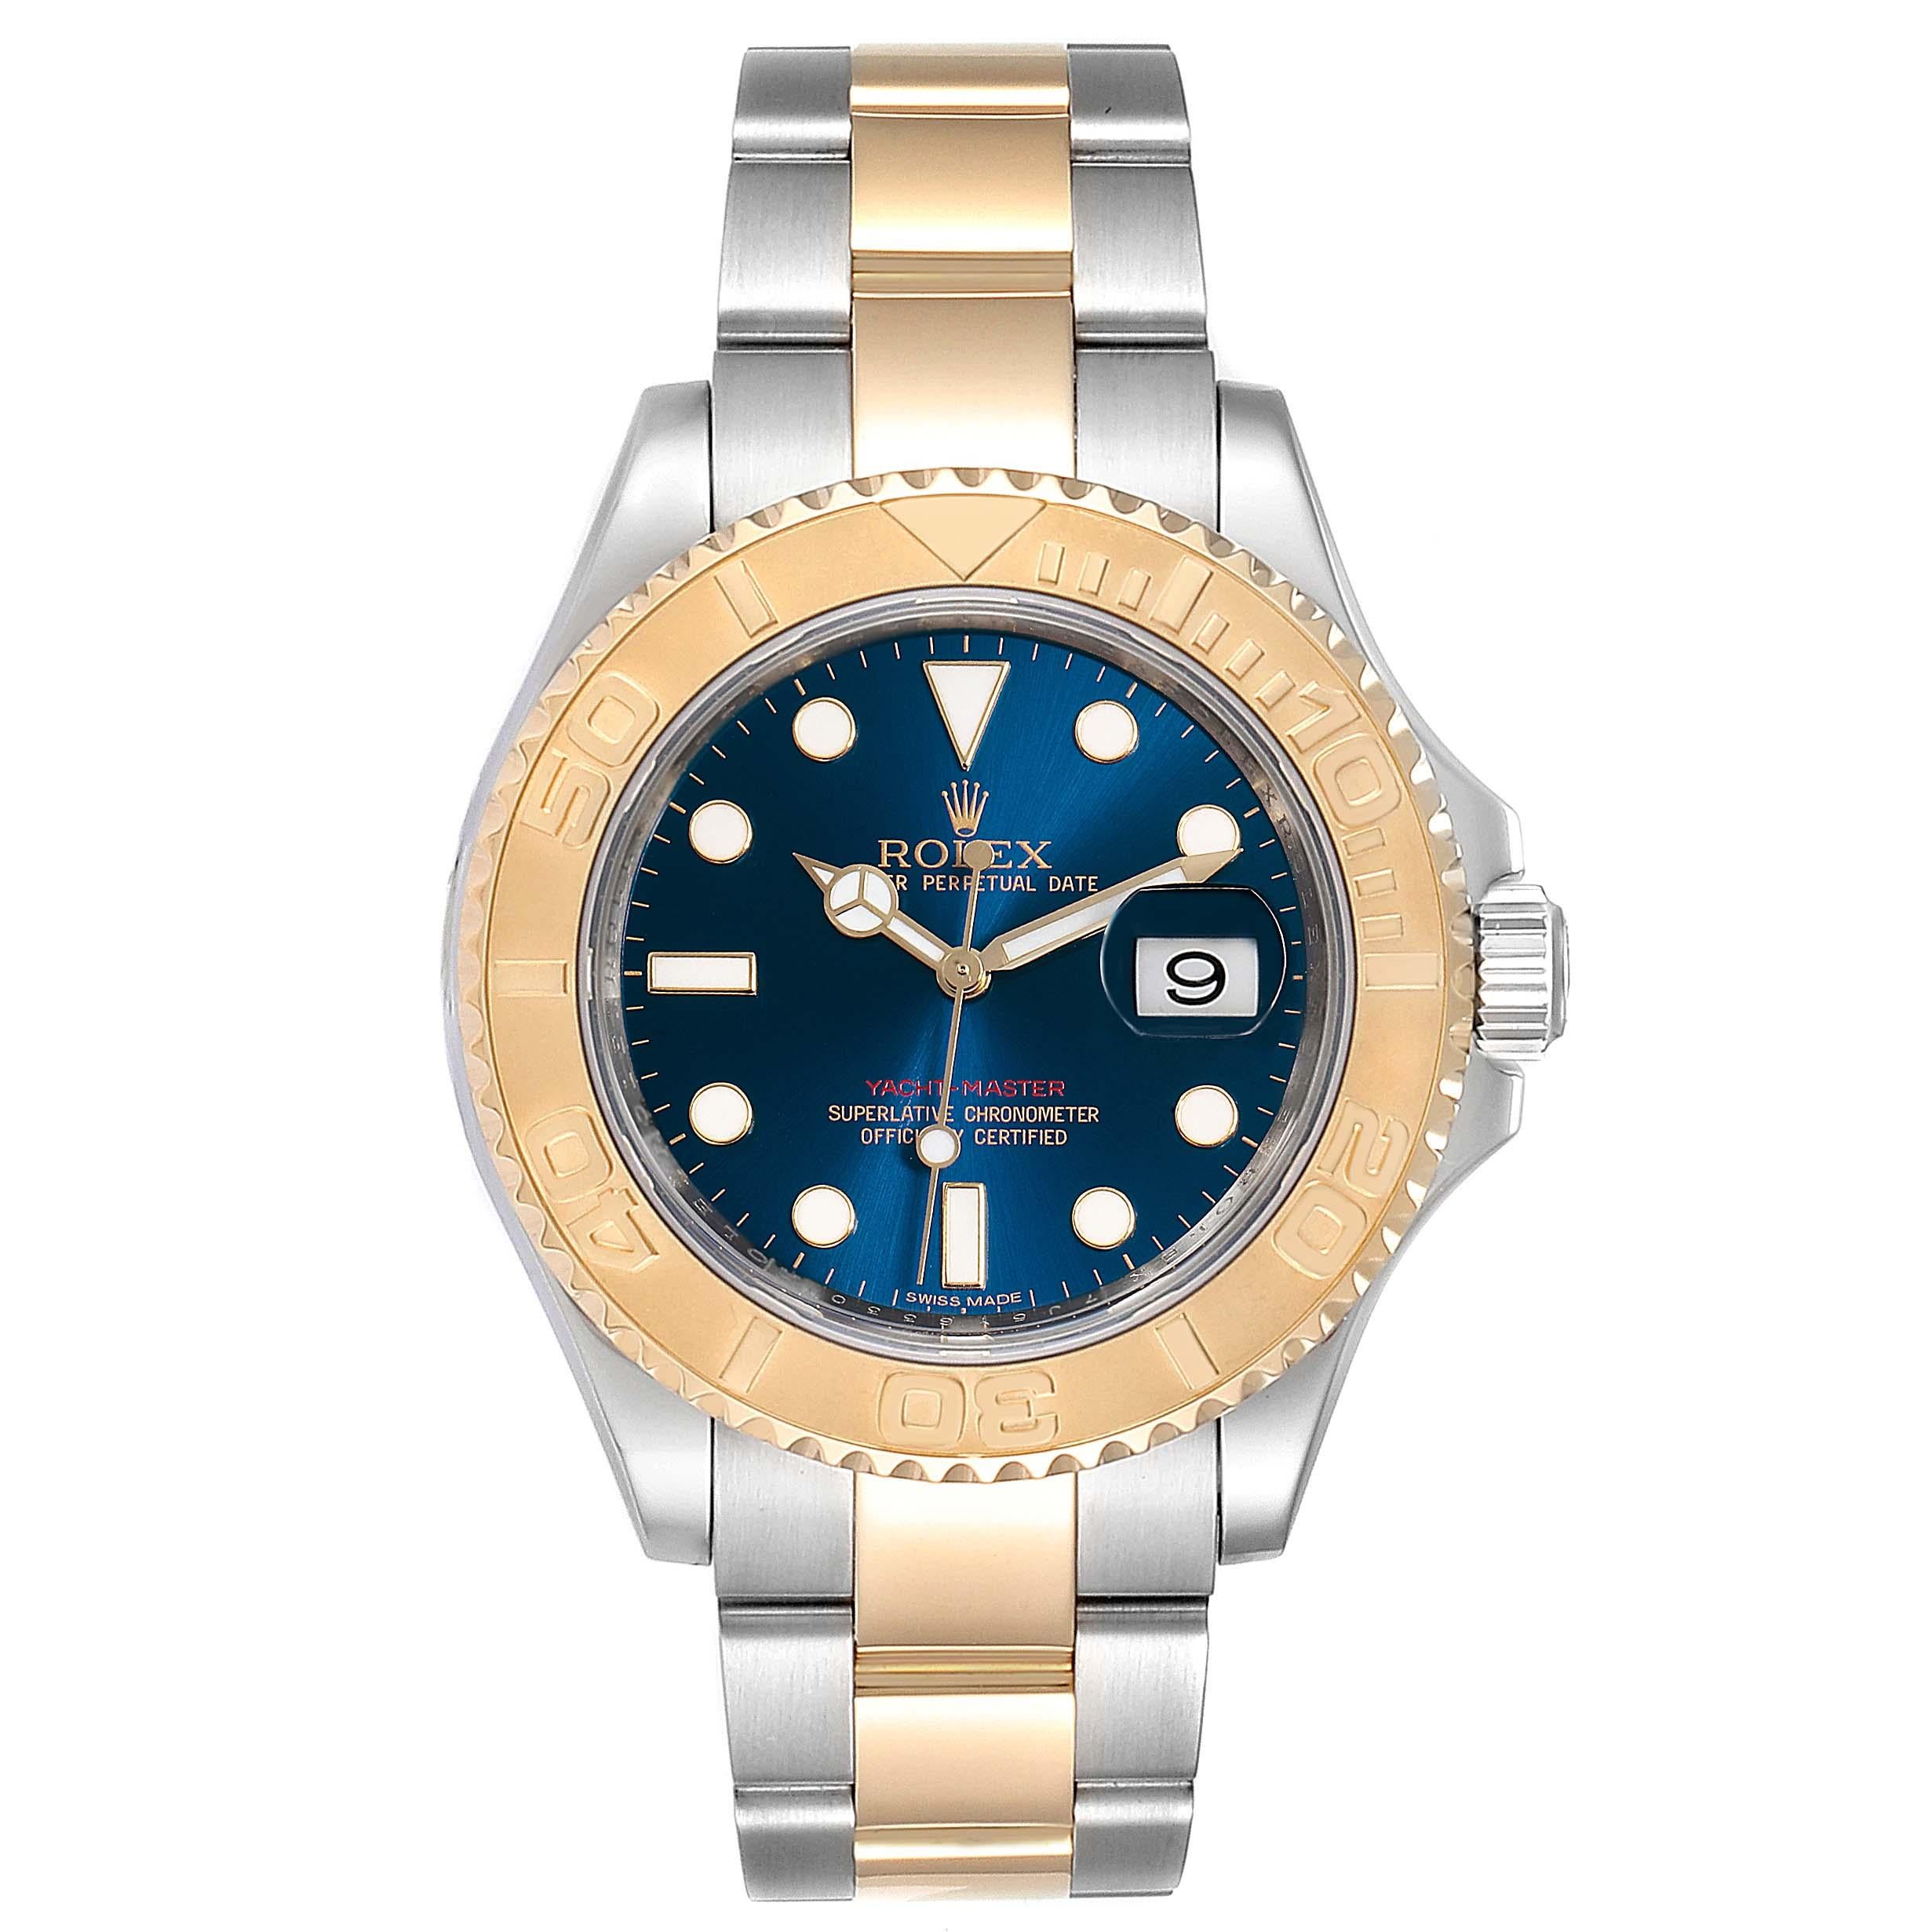 Rolex Yachtmaster 40mm Steel Yellow Gold Blue Dial Mens Watch 16623. Officially certified chronometer self-winding movement. Stainless steel case 40 mm in diameter. Rolex logo on a crown. 18k yellow gold special time-lapse unidirectional rotating